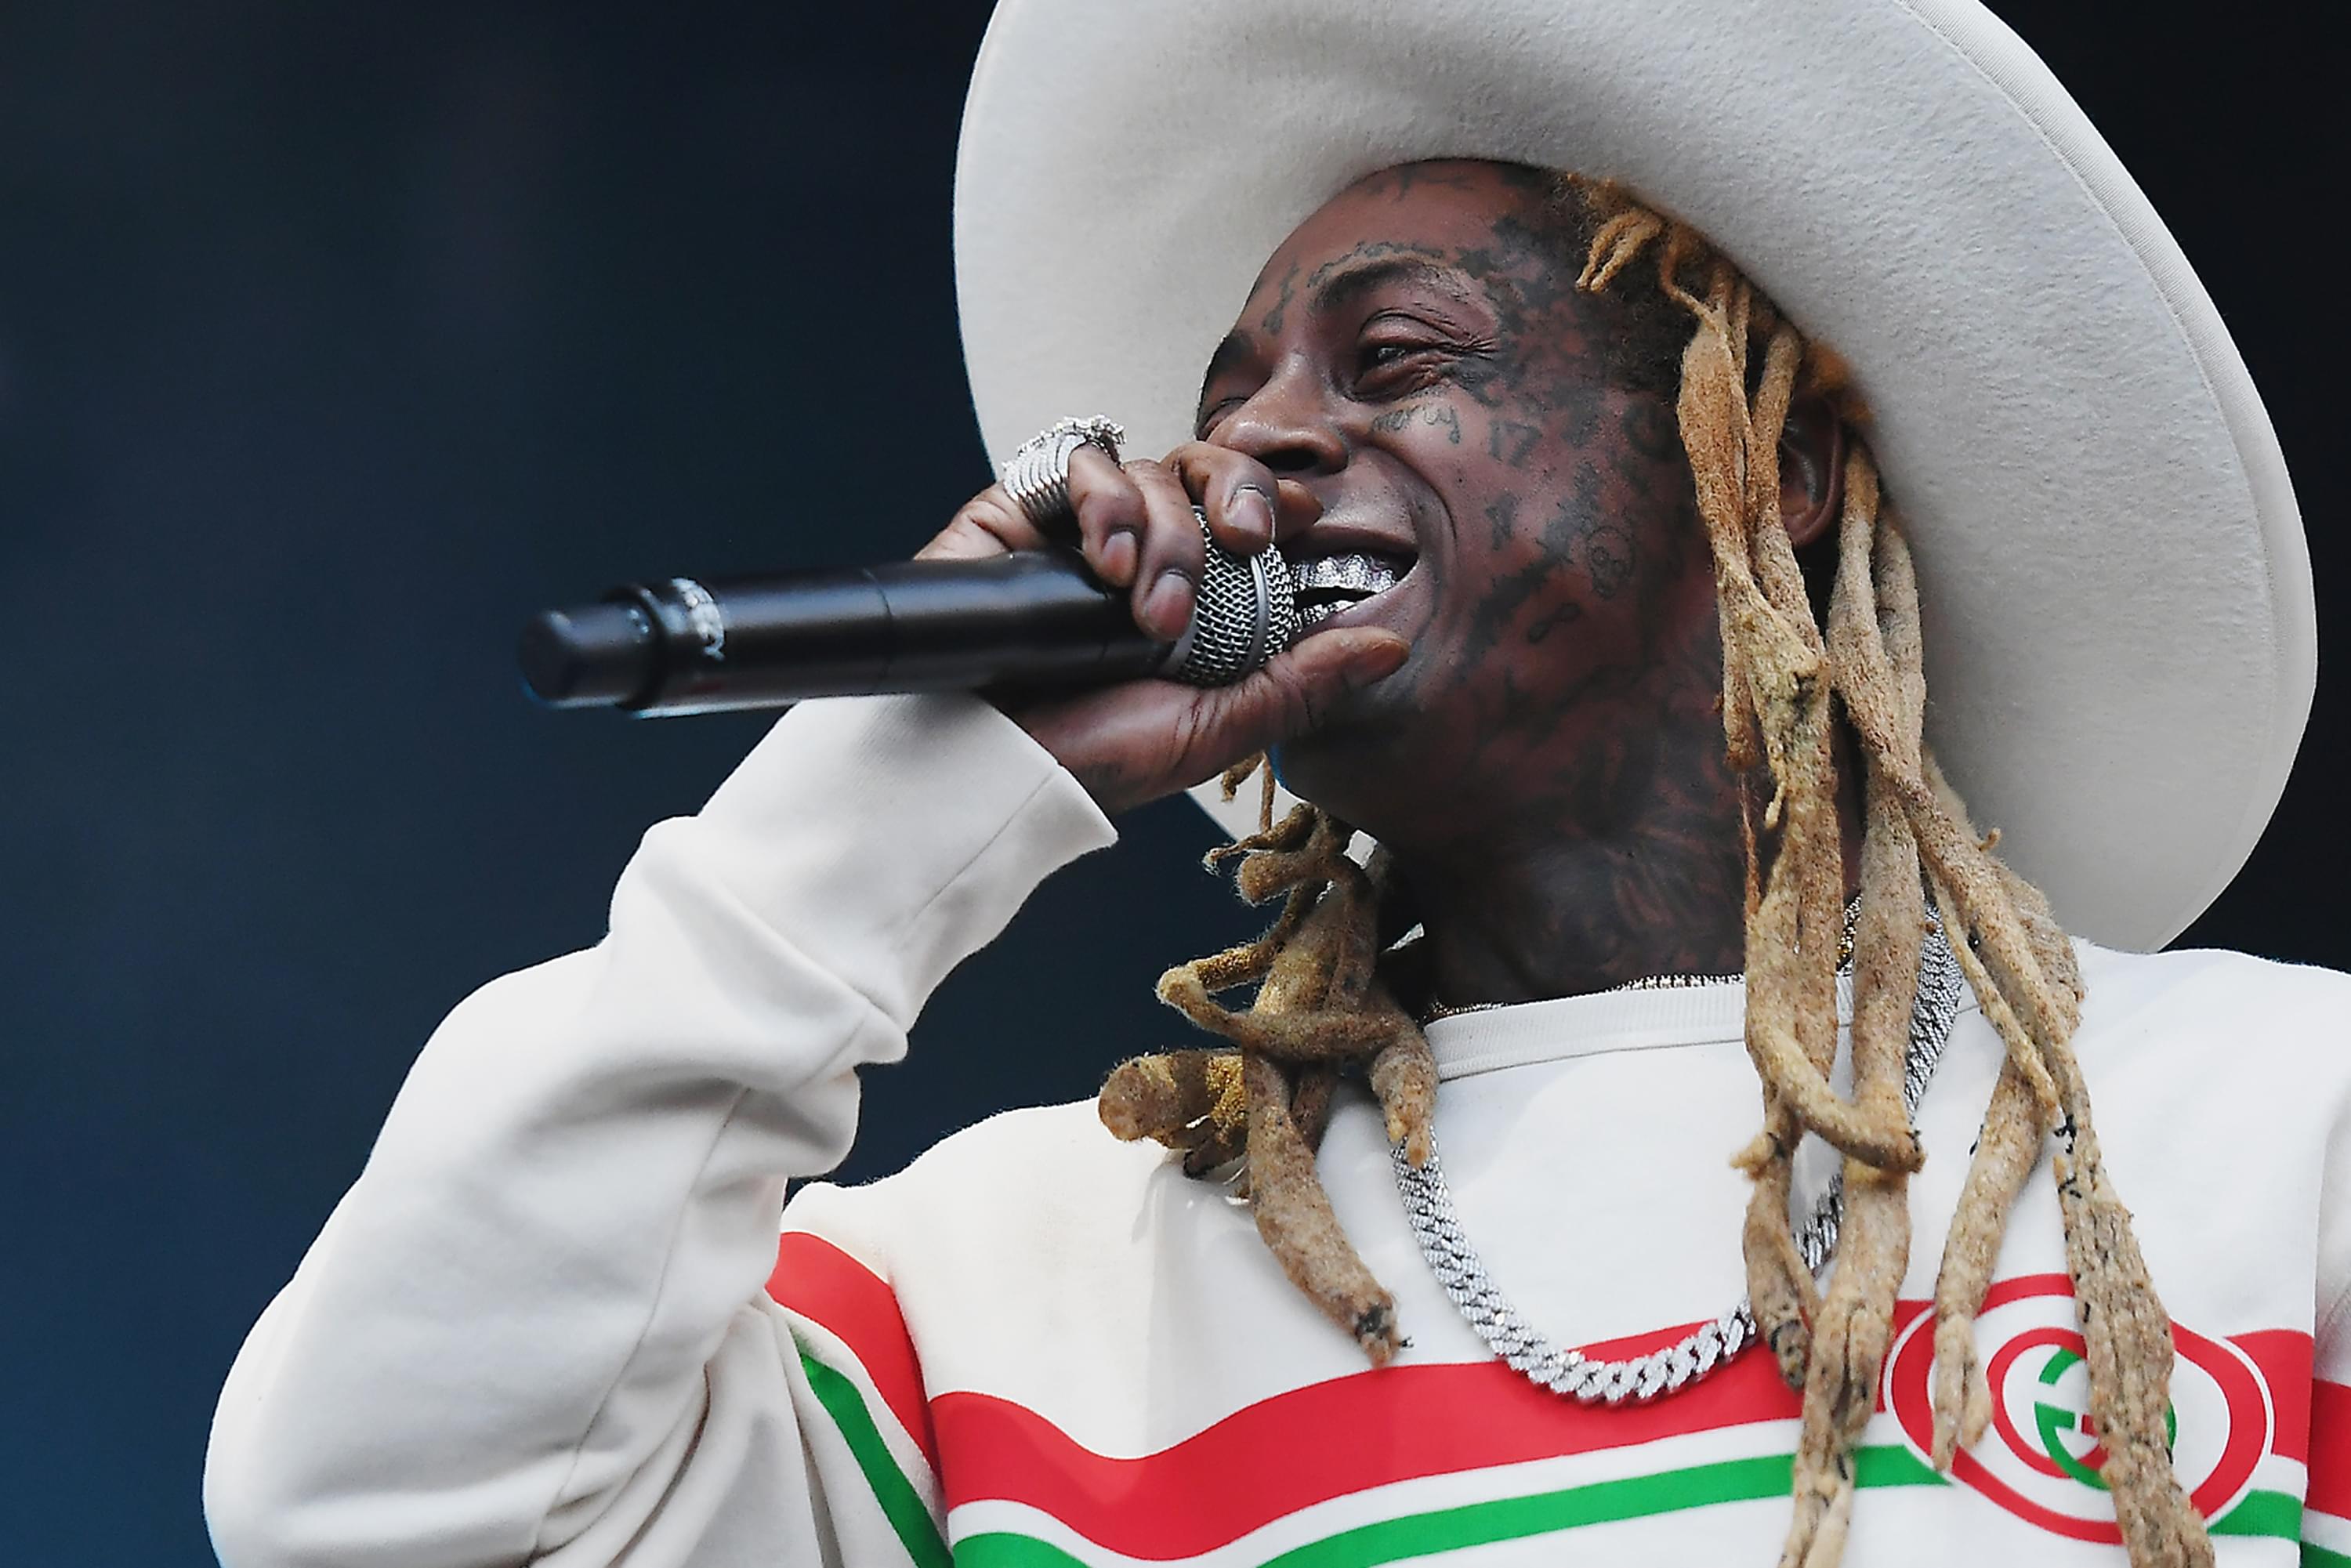 Lil Wayne Held At South Florida Airport After Drugs & Guns Were Allegedly Found On His Plane